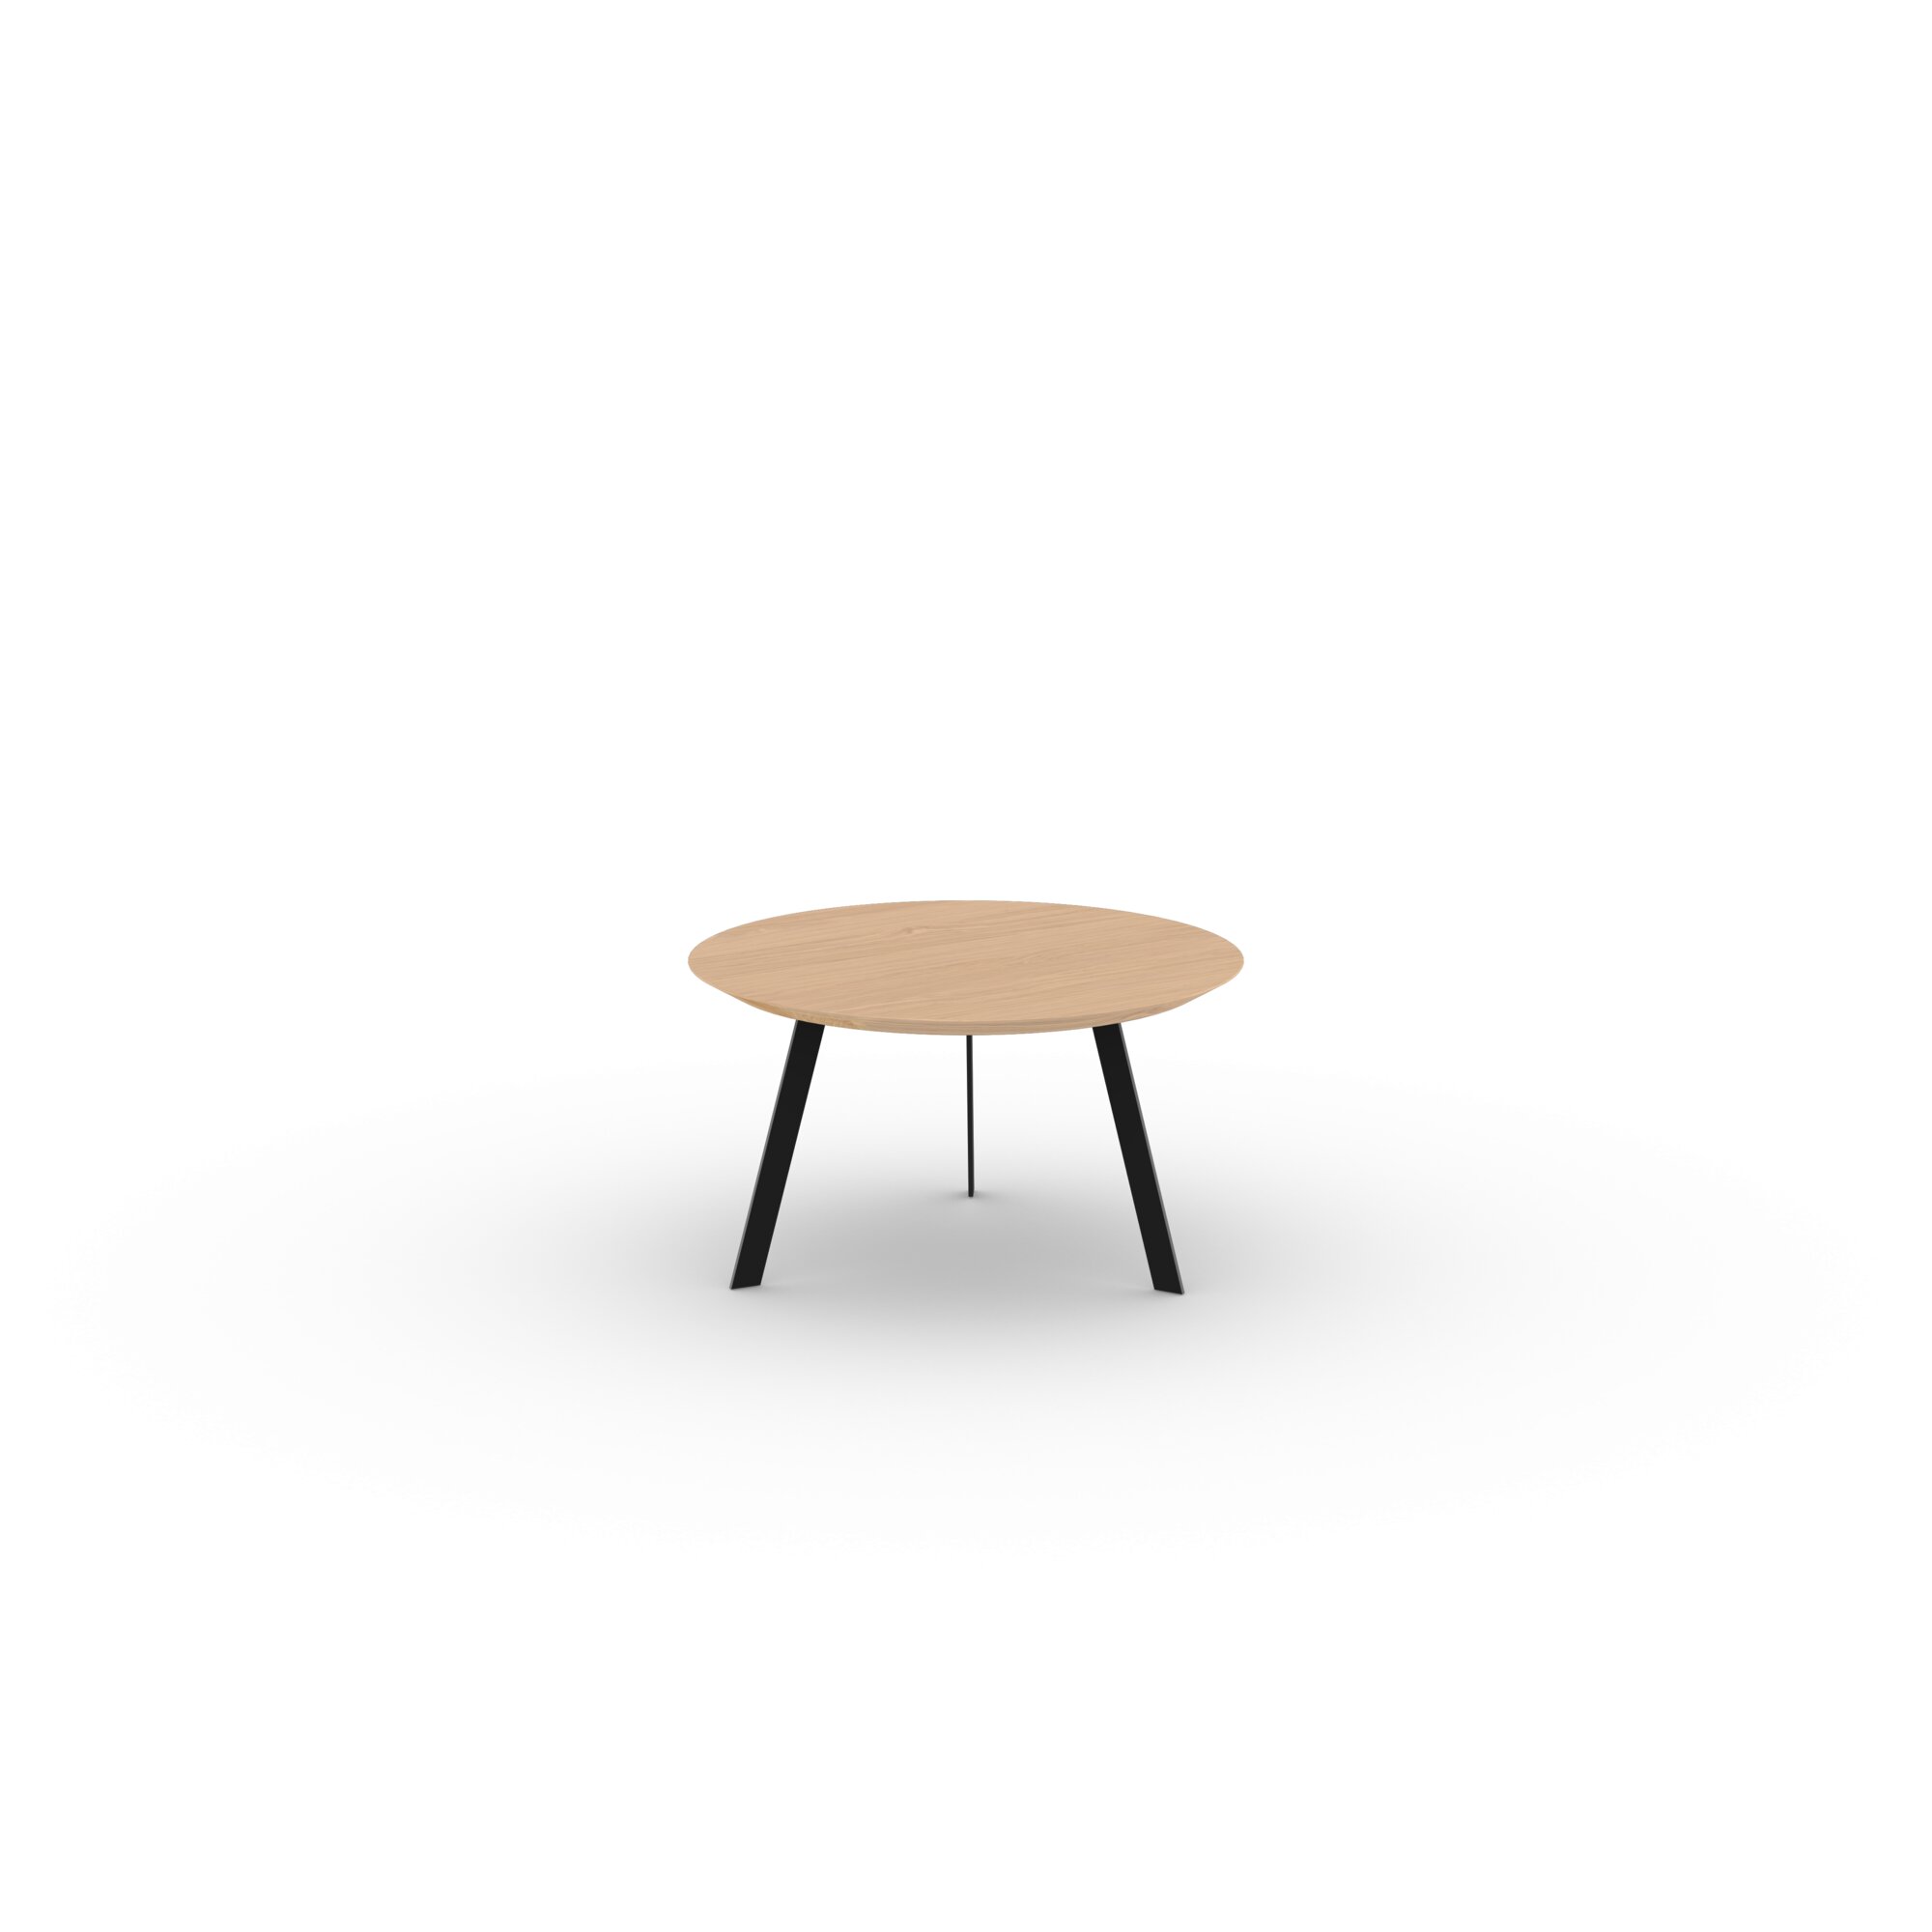 Design Coffee Table | New Co Coffee Table 70 Round Black | Oak hardwax oil natural light 3041 | Studio HENK| 